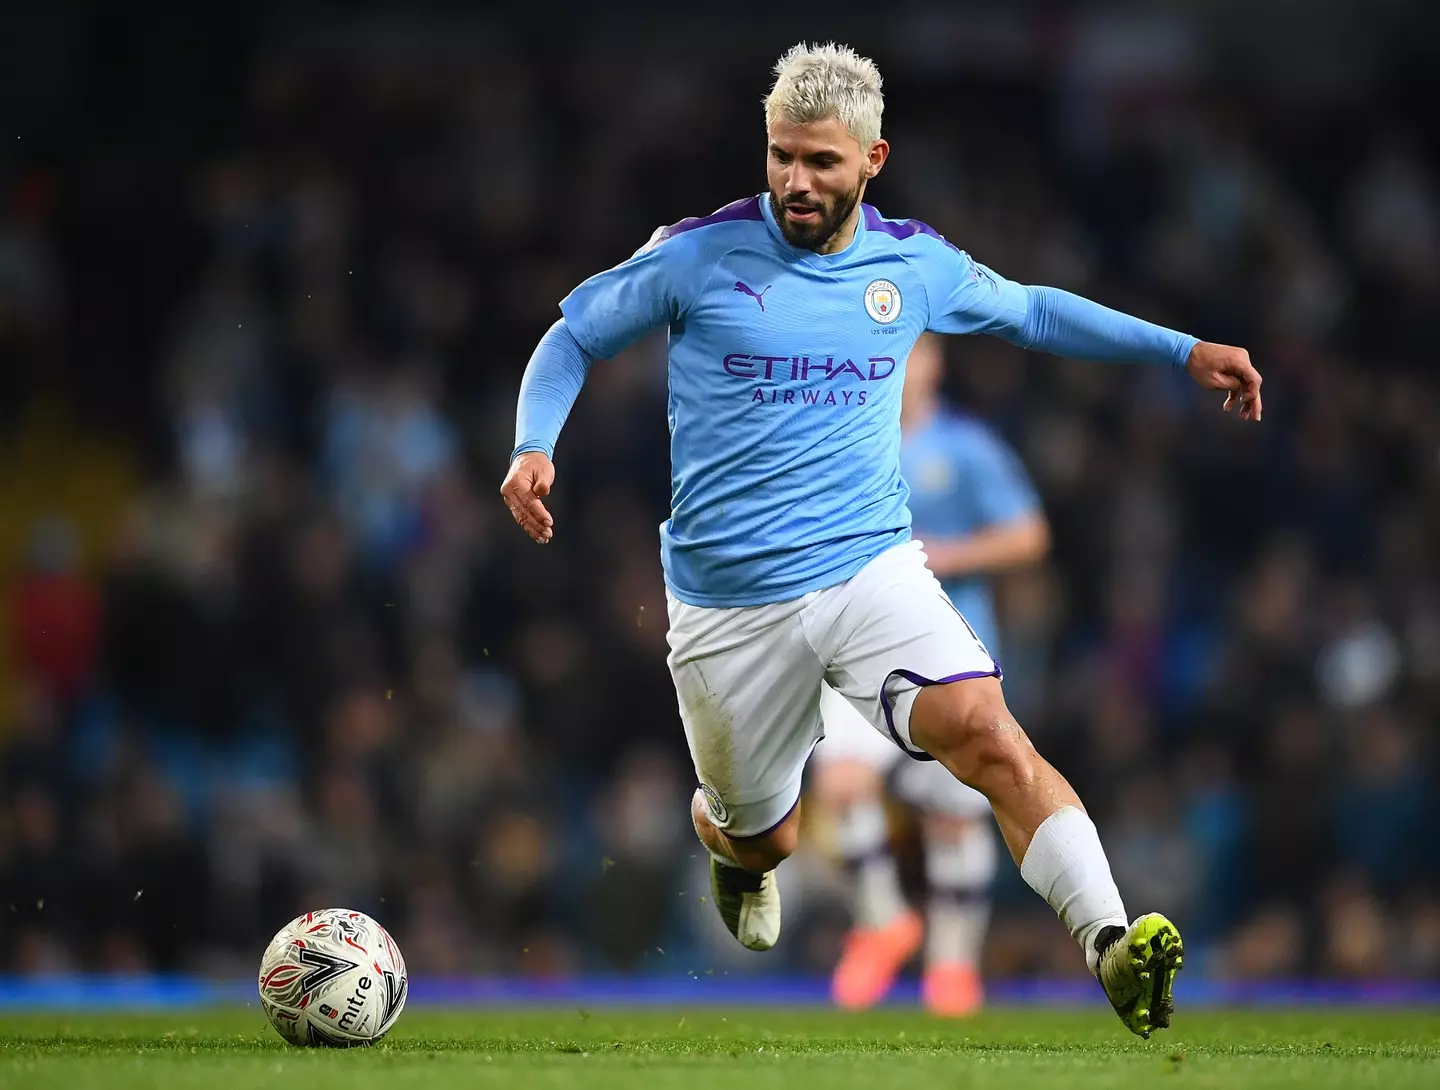 Sergio Aguero in action for Manchester City. Image: Getty